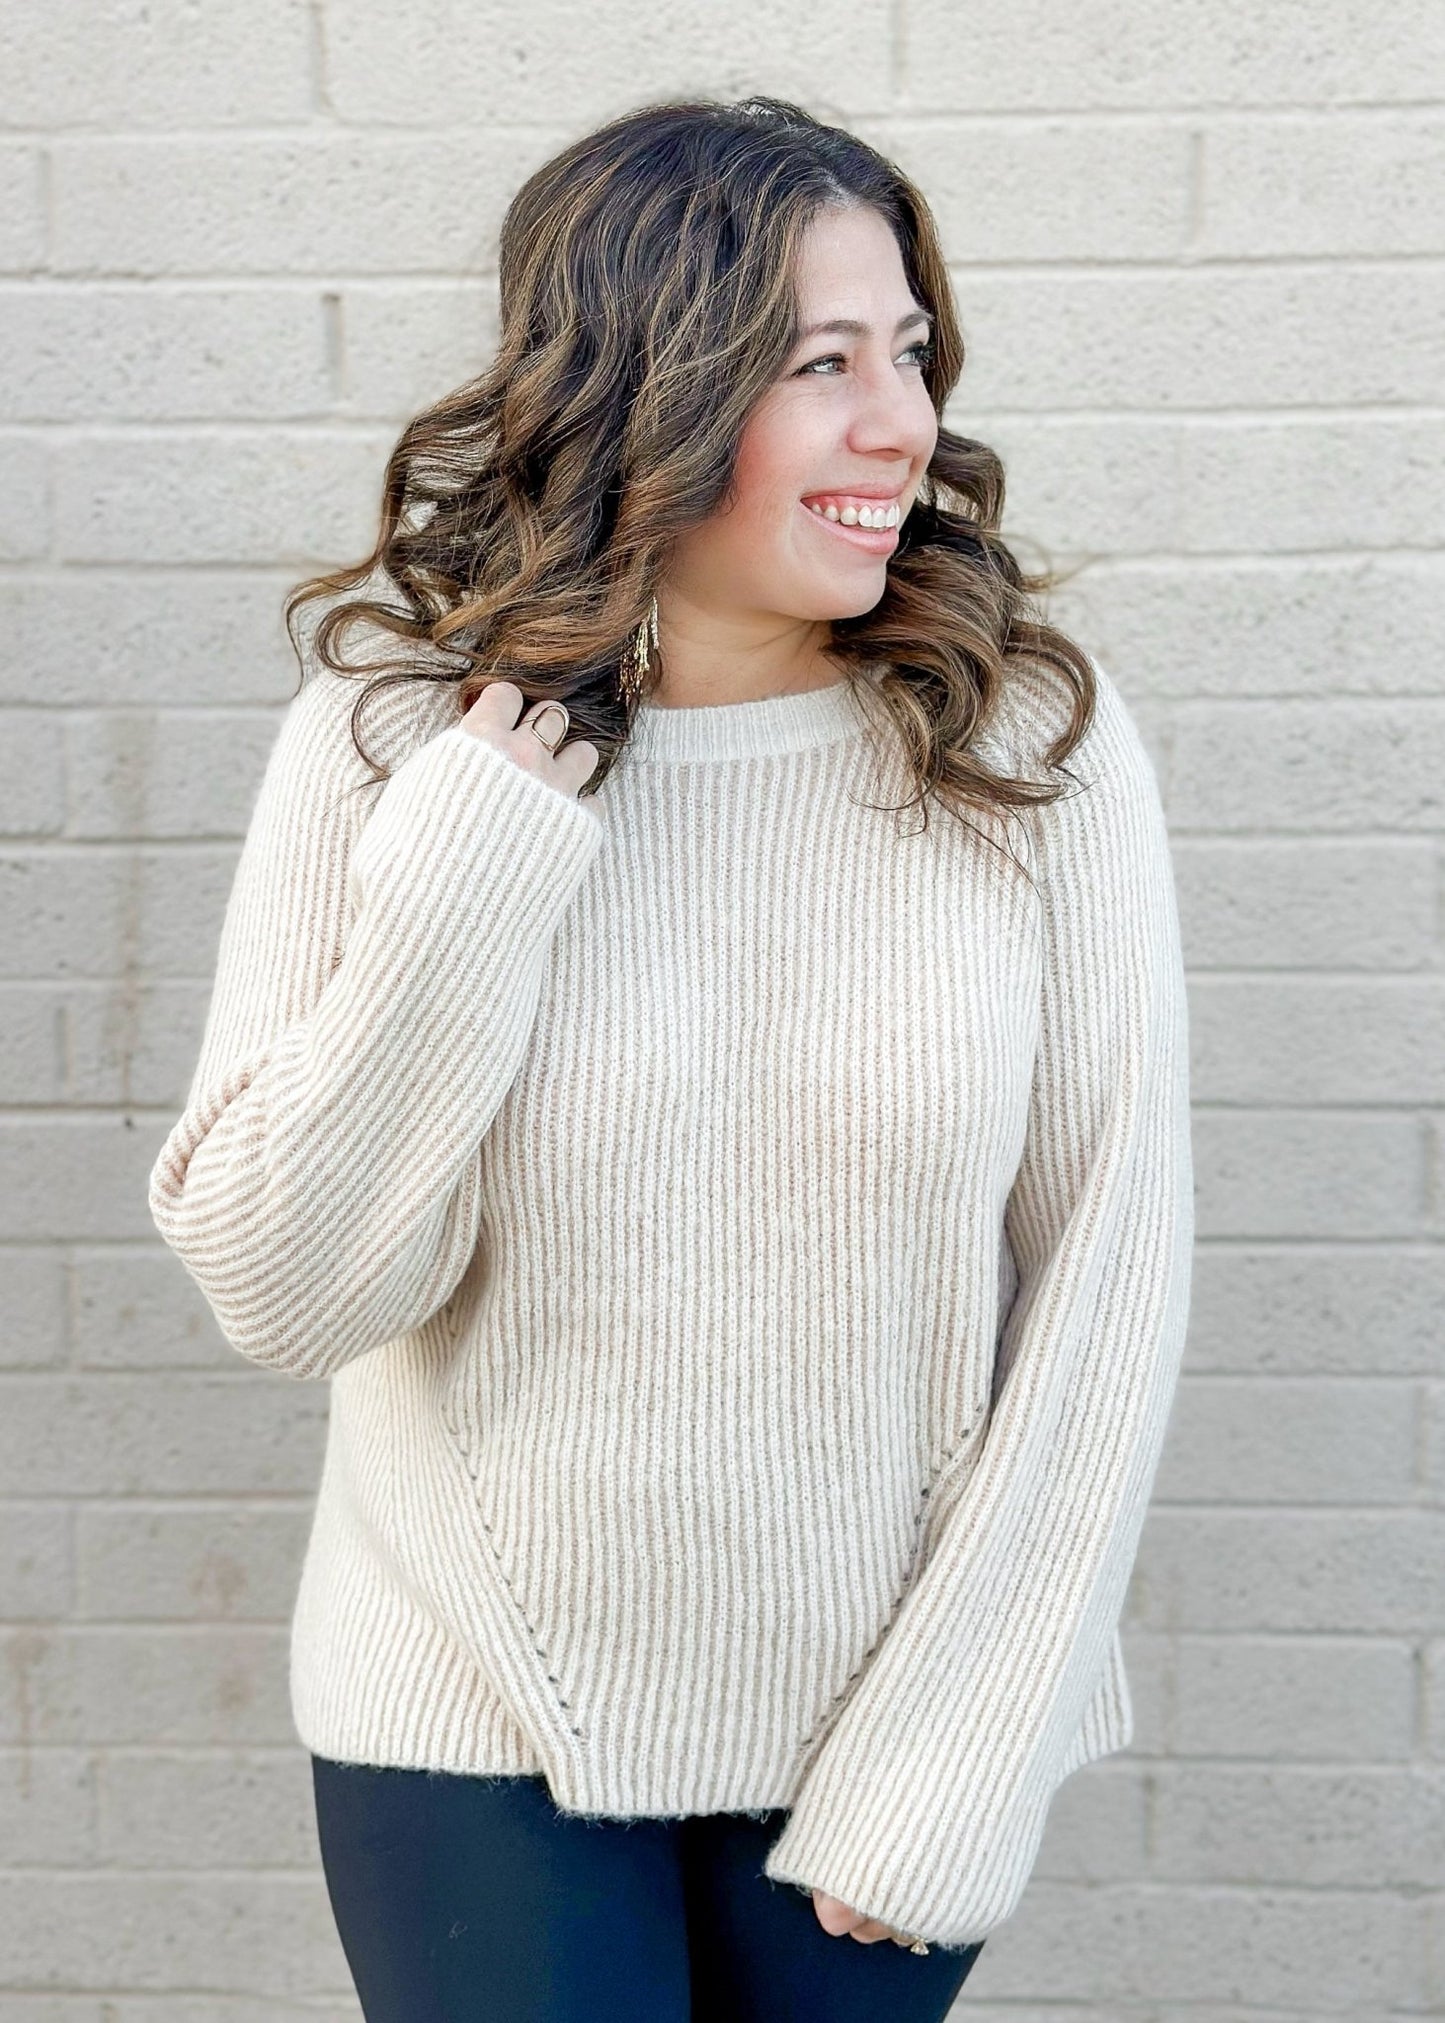 Penny Pinstripe Sweater - Taupe - The Farmhouse